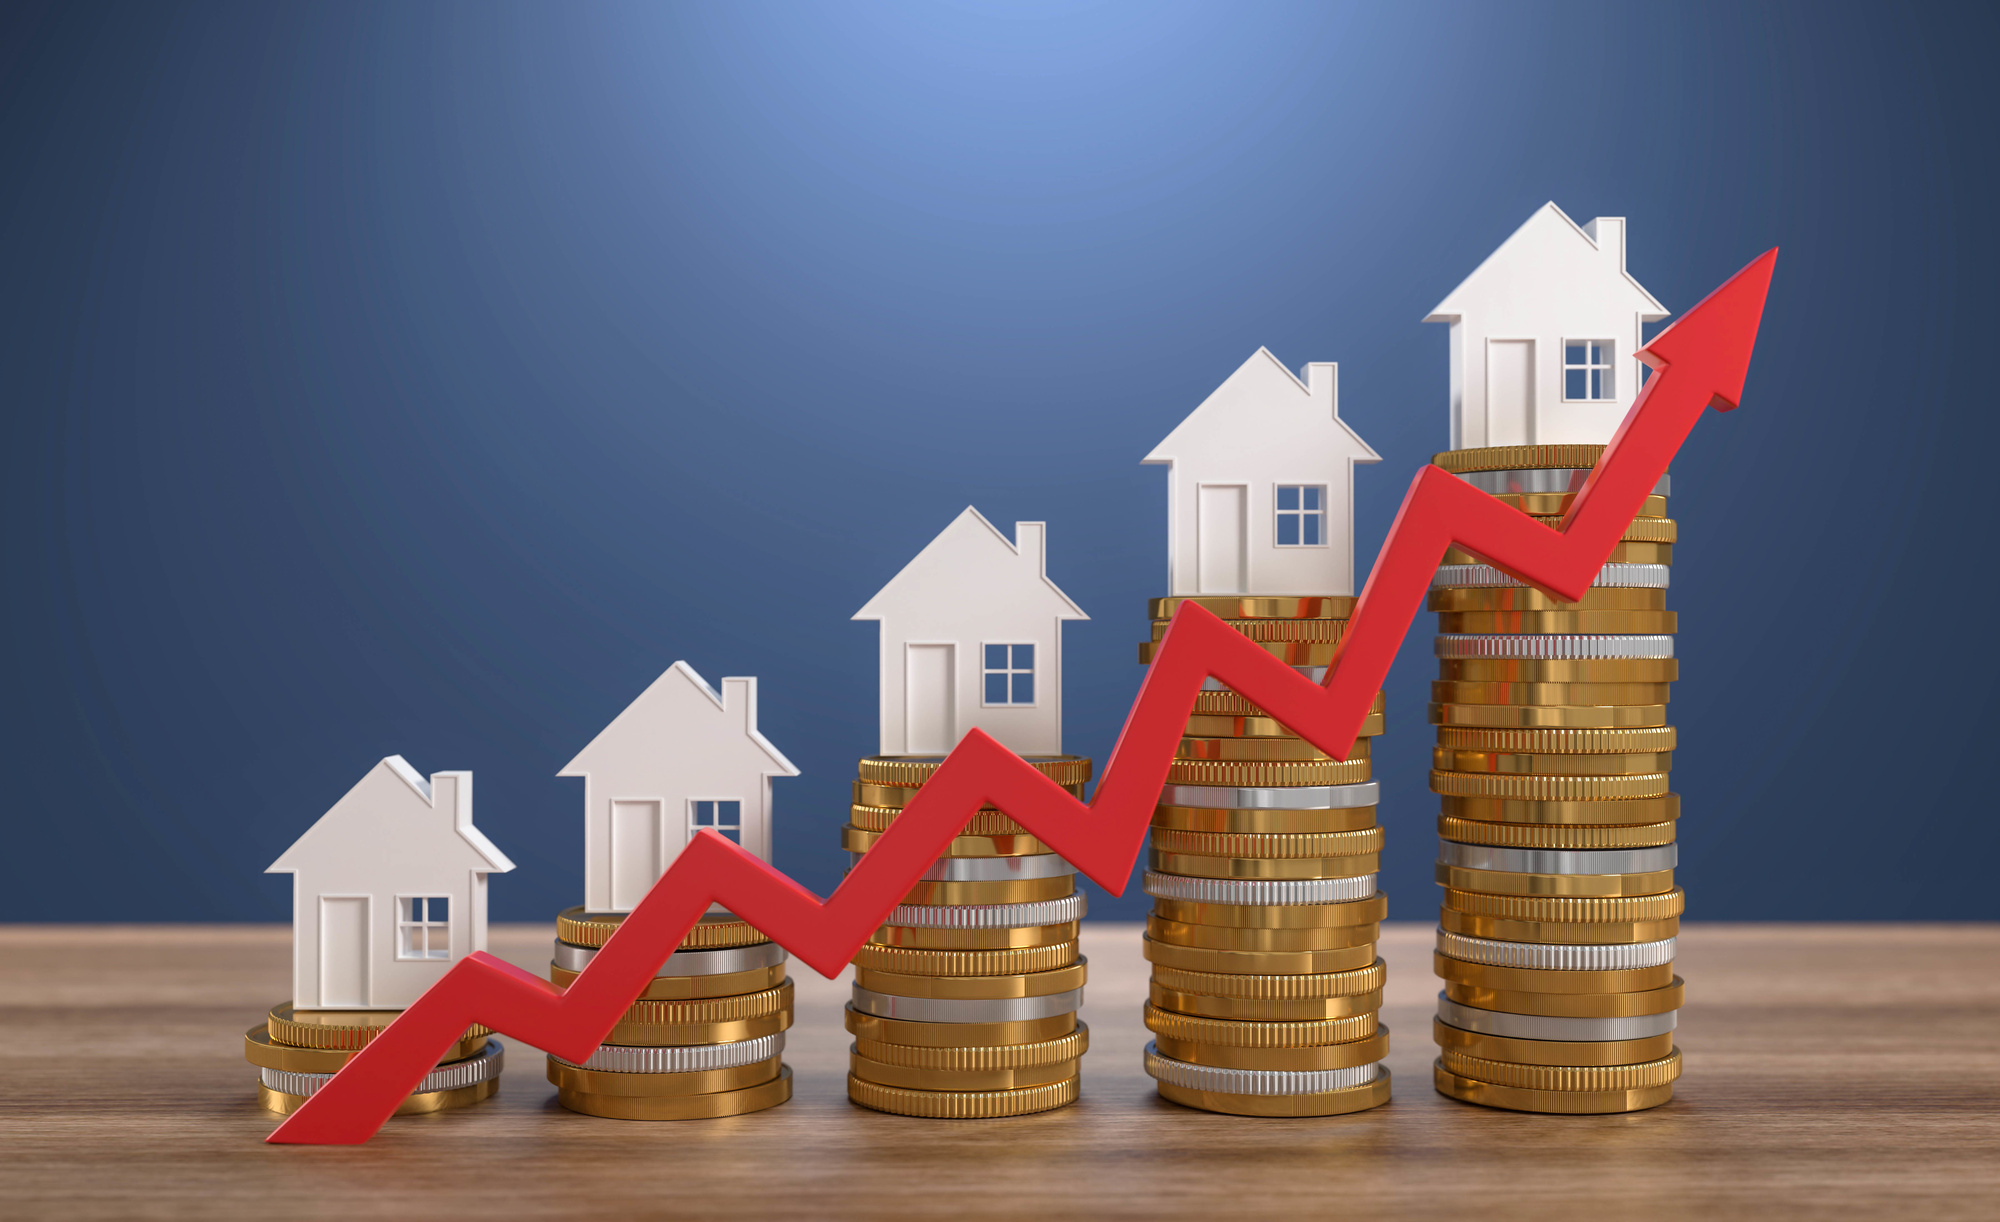 6 Common Real Estate Investing Myths